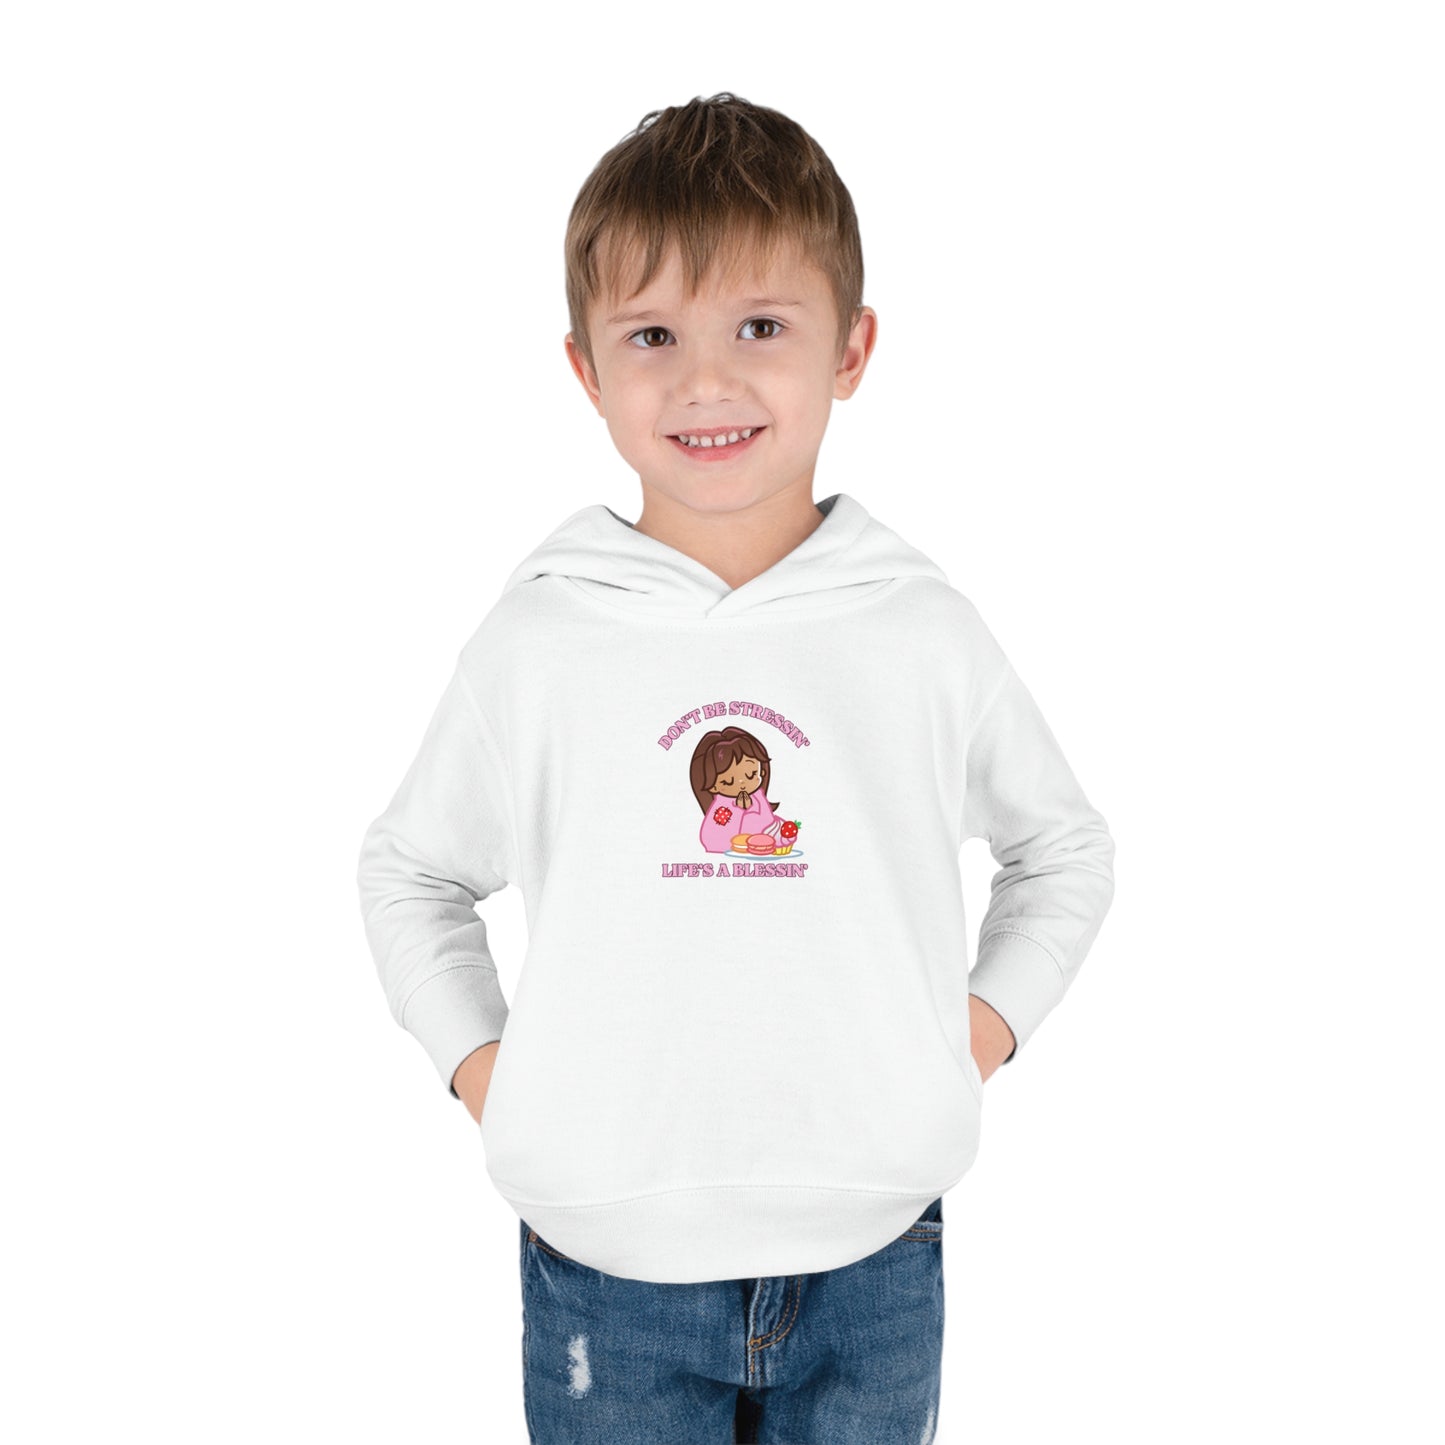 Life's A Blessing Kids Pullover Fleece Hoodie, Christian Pullover for Kids, Jesus Hoodie, Toddler & Youth Faith Apparel, Kids Cute Faith Hoodie